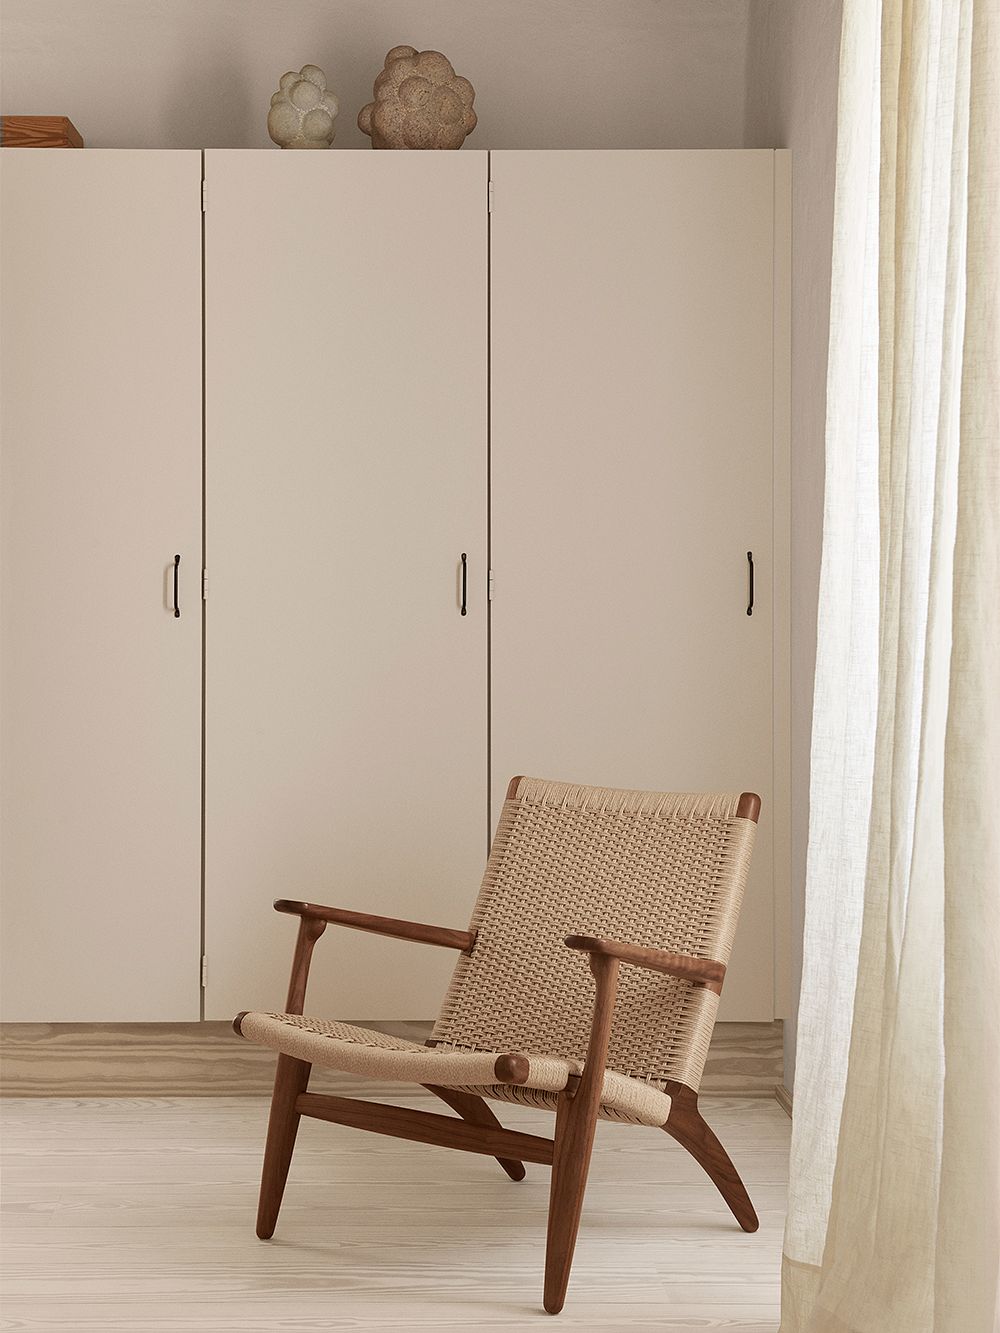 An image featuring Carl Hansen & Søn's CH25 armchair as part of the bedroom interior.